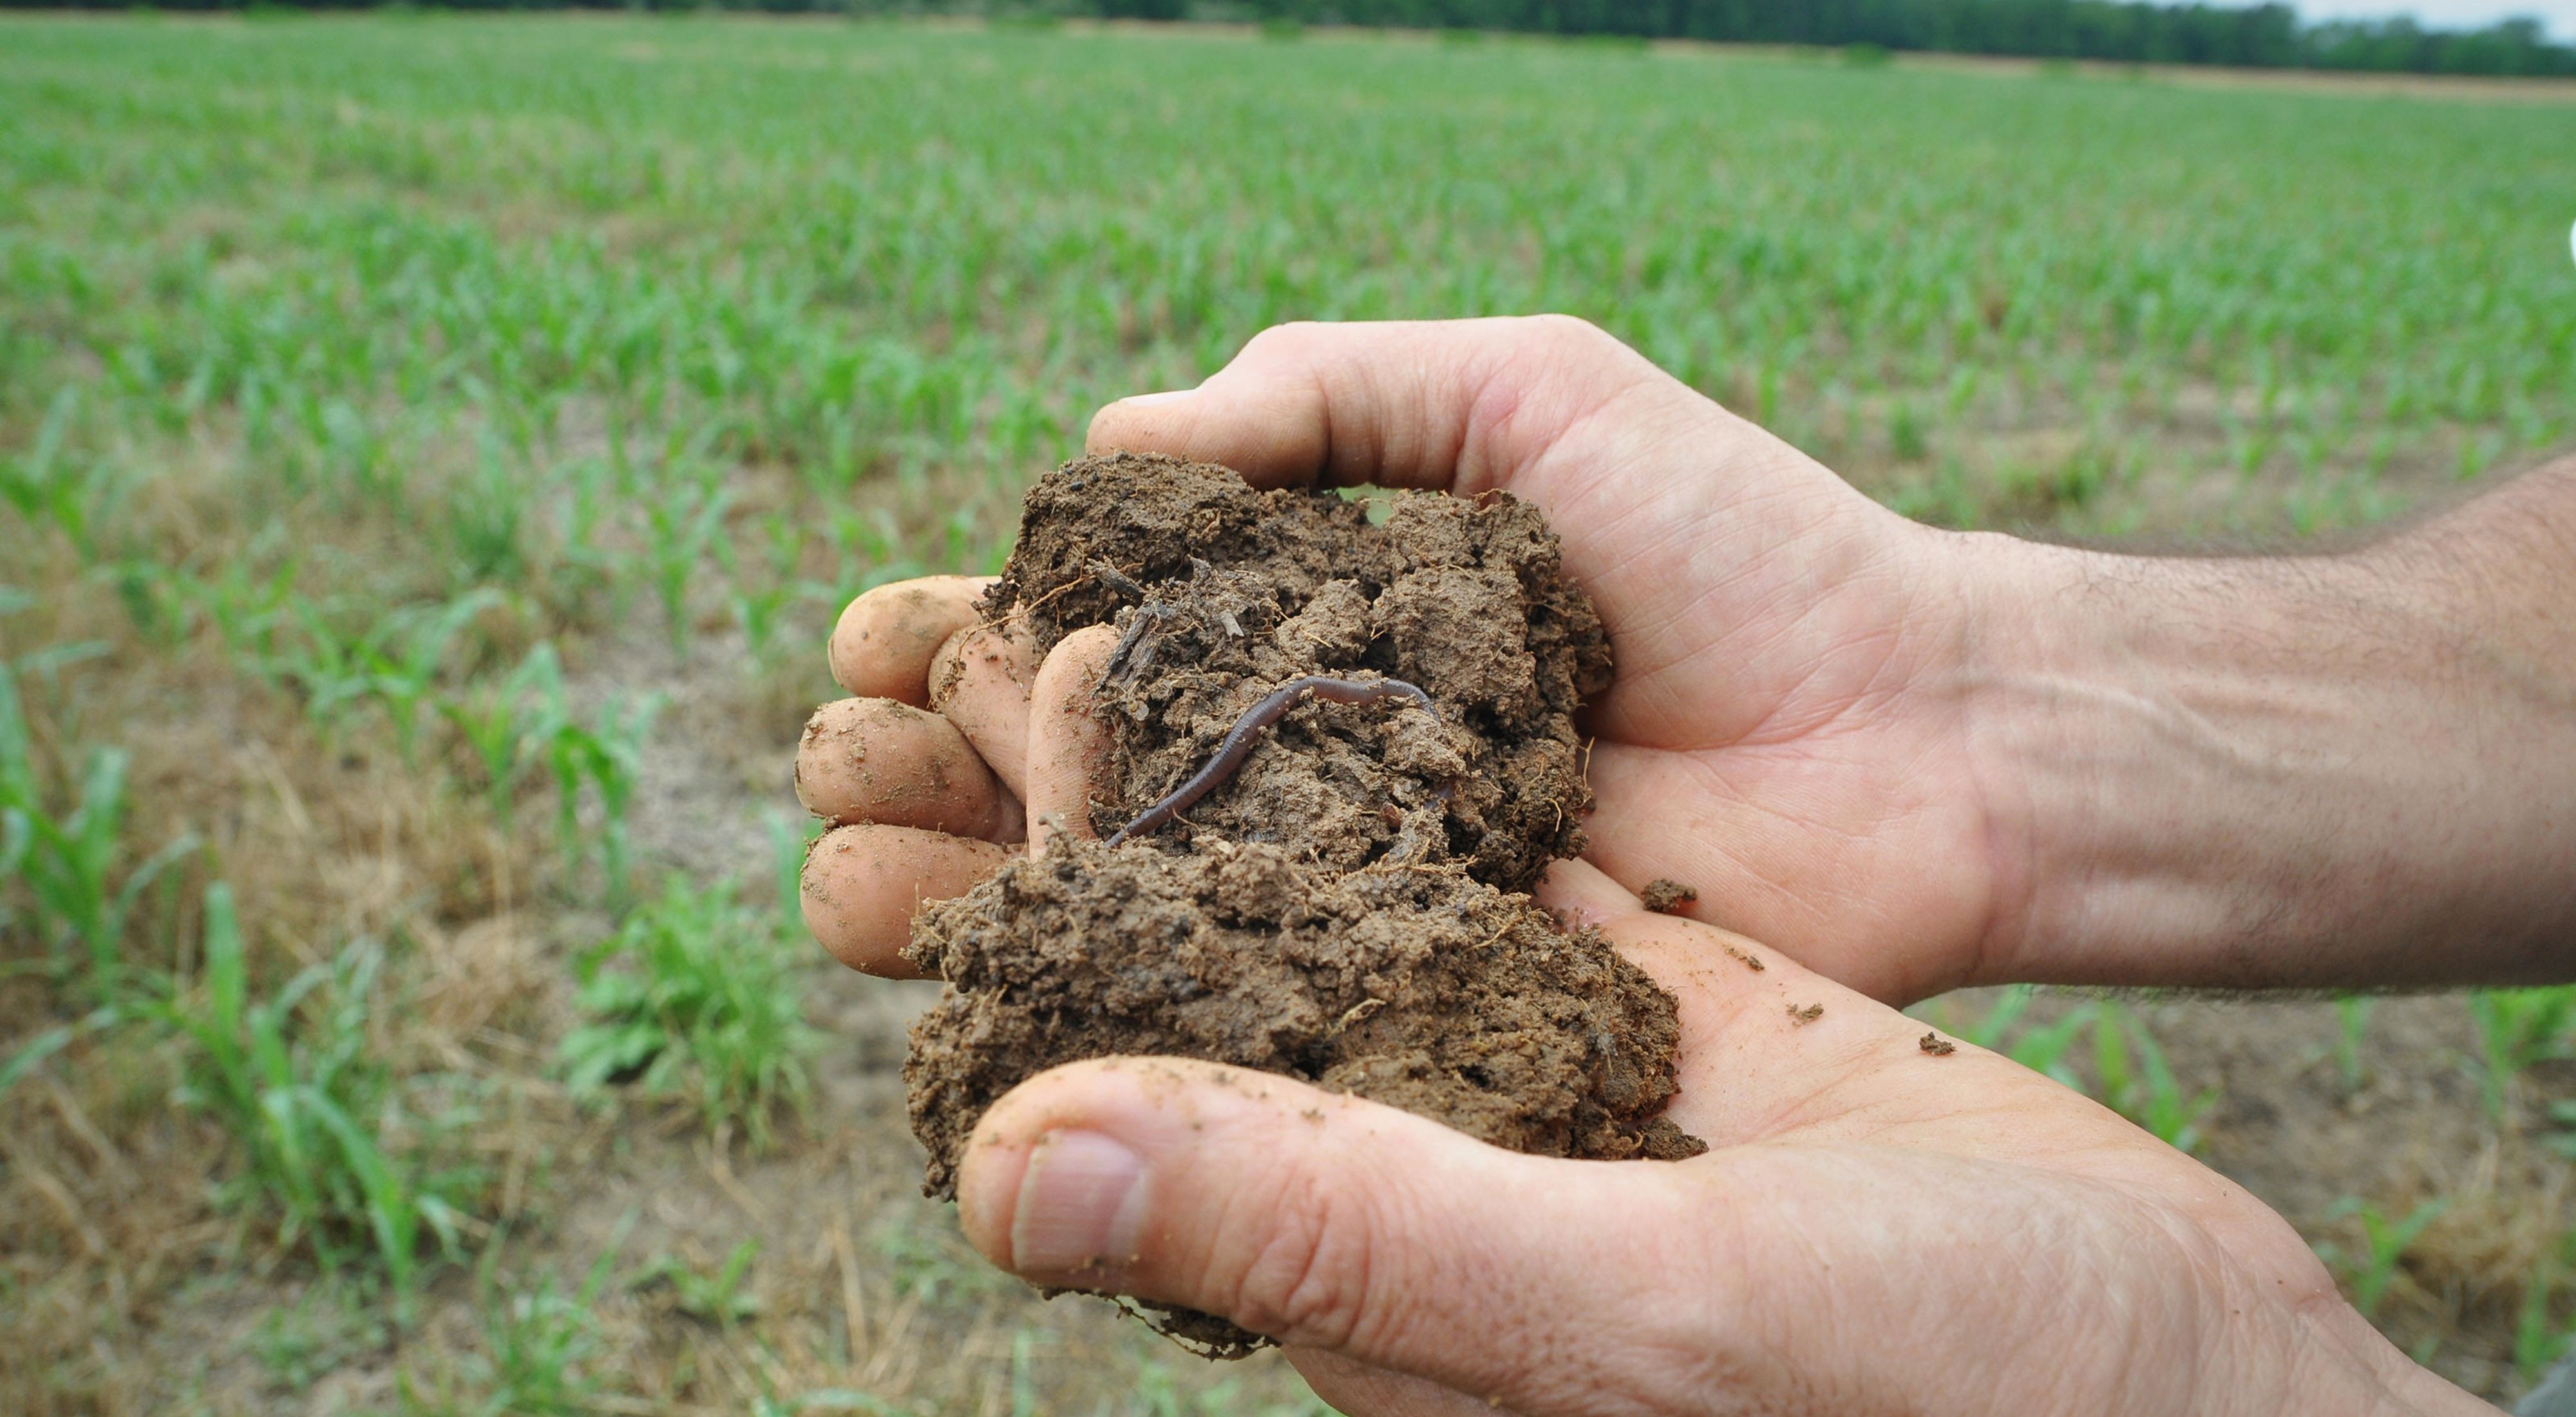 Hands in a farm field, holding soil with earthworms in it.